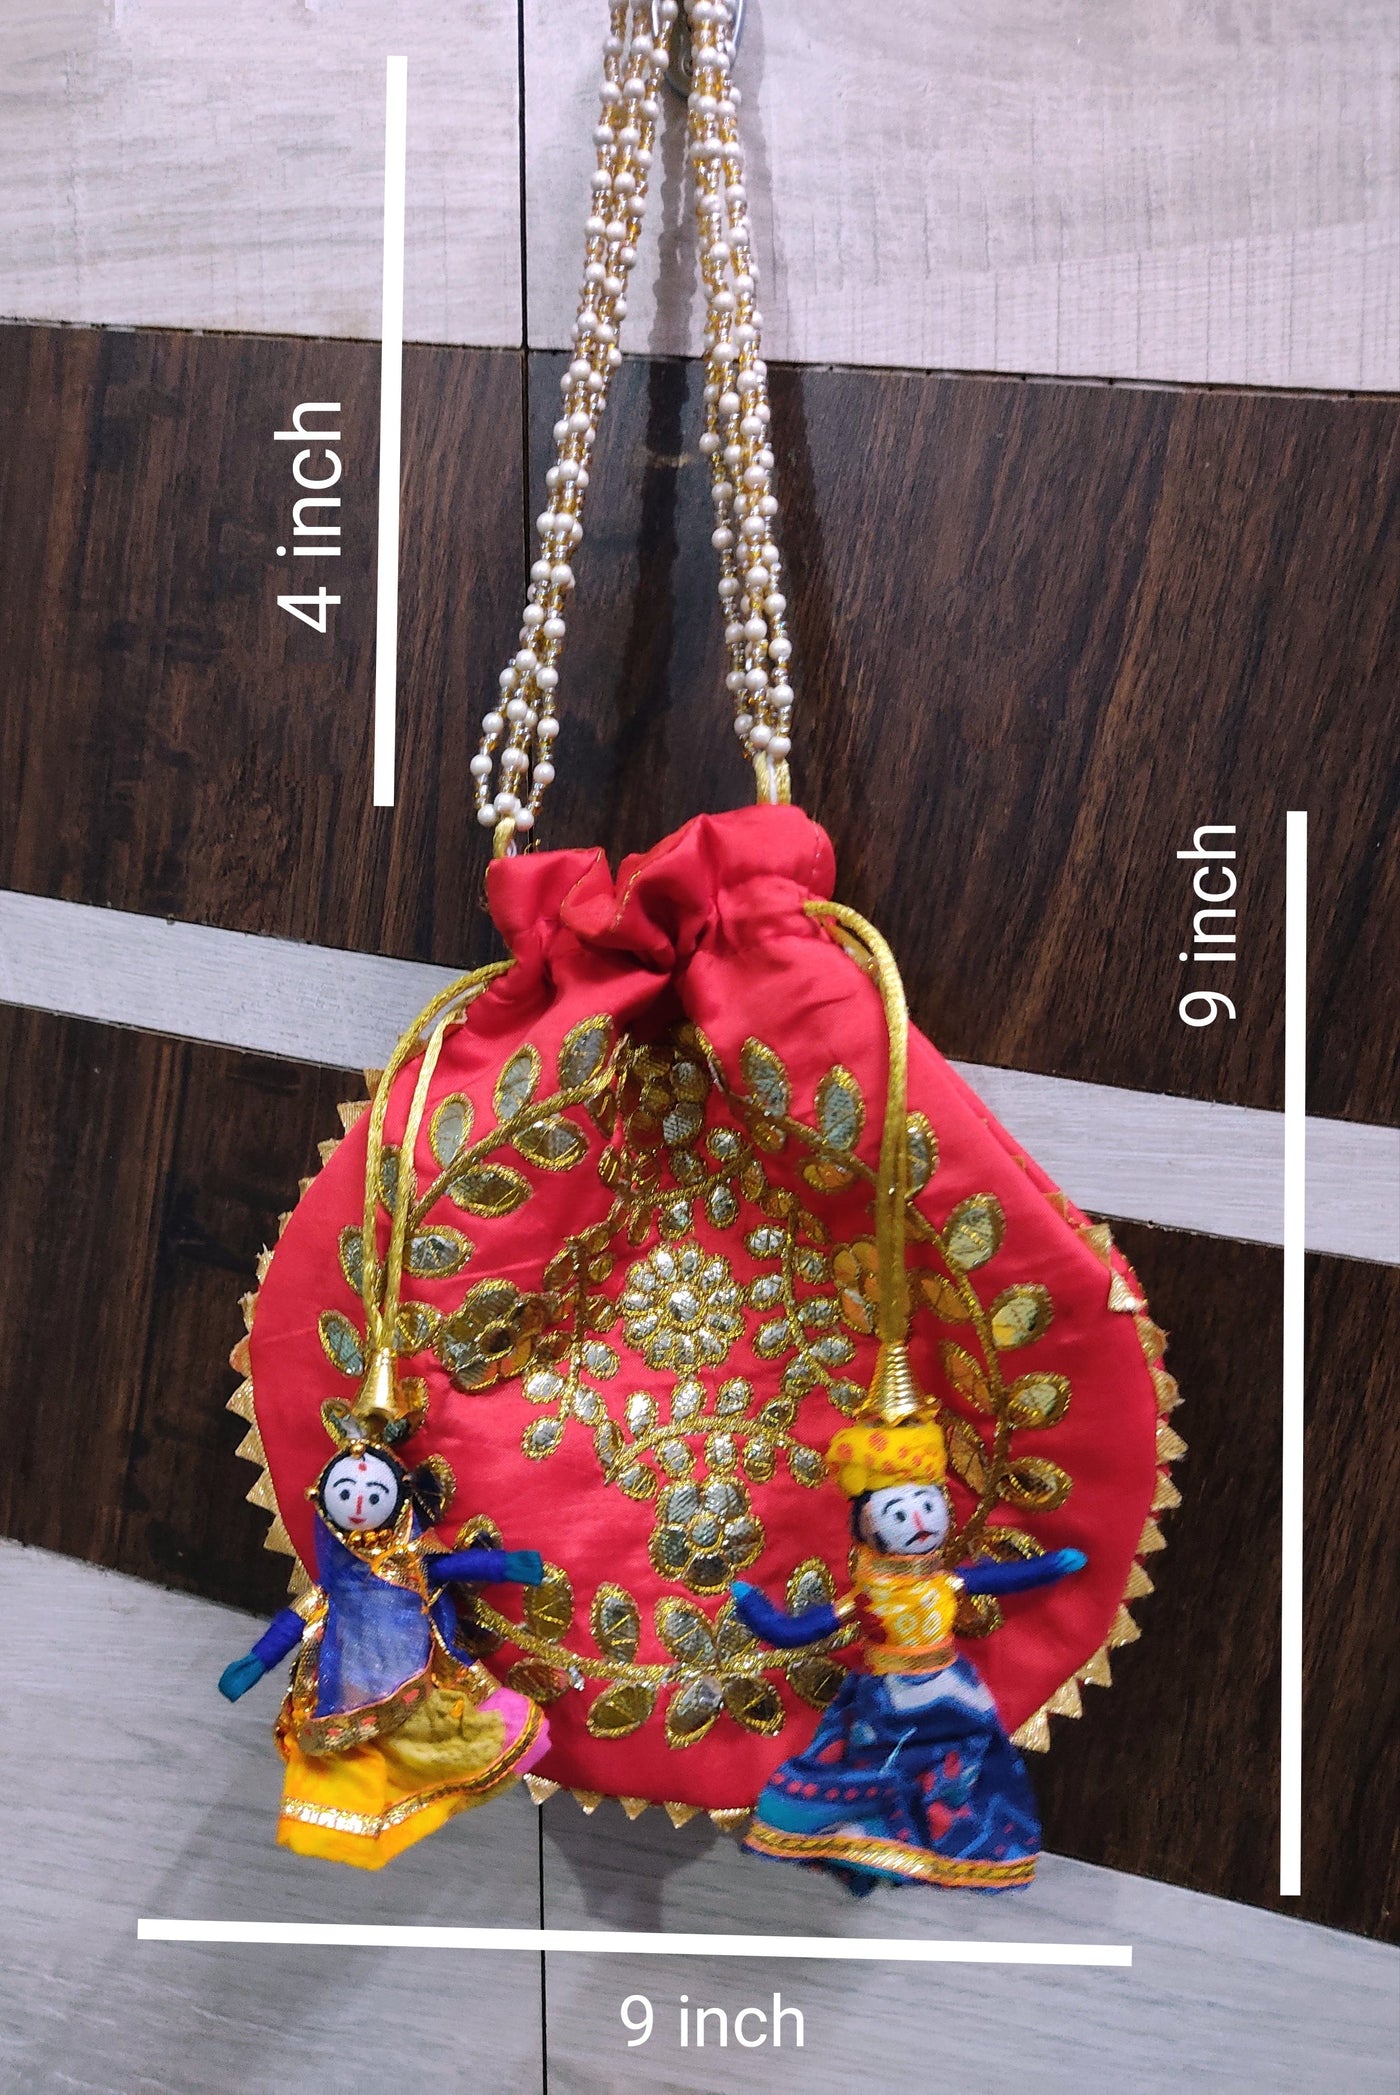 LAMANSH ® Women's Potli Bag LAMANSH® 9*9 inch Gota work Embroidered Potli bags with Raja Rani puppets for Giveaways for women / Return Gifts 🎁 Favours for guests